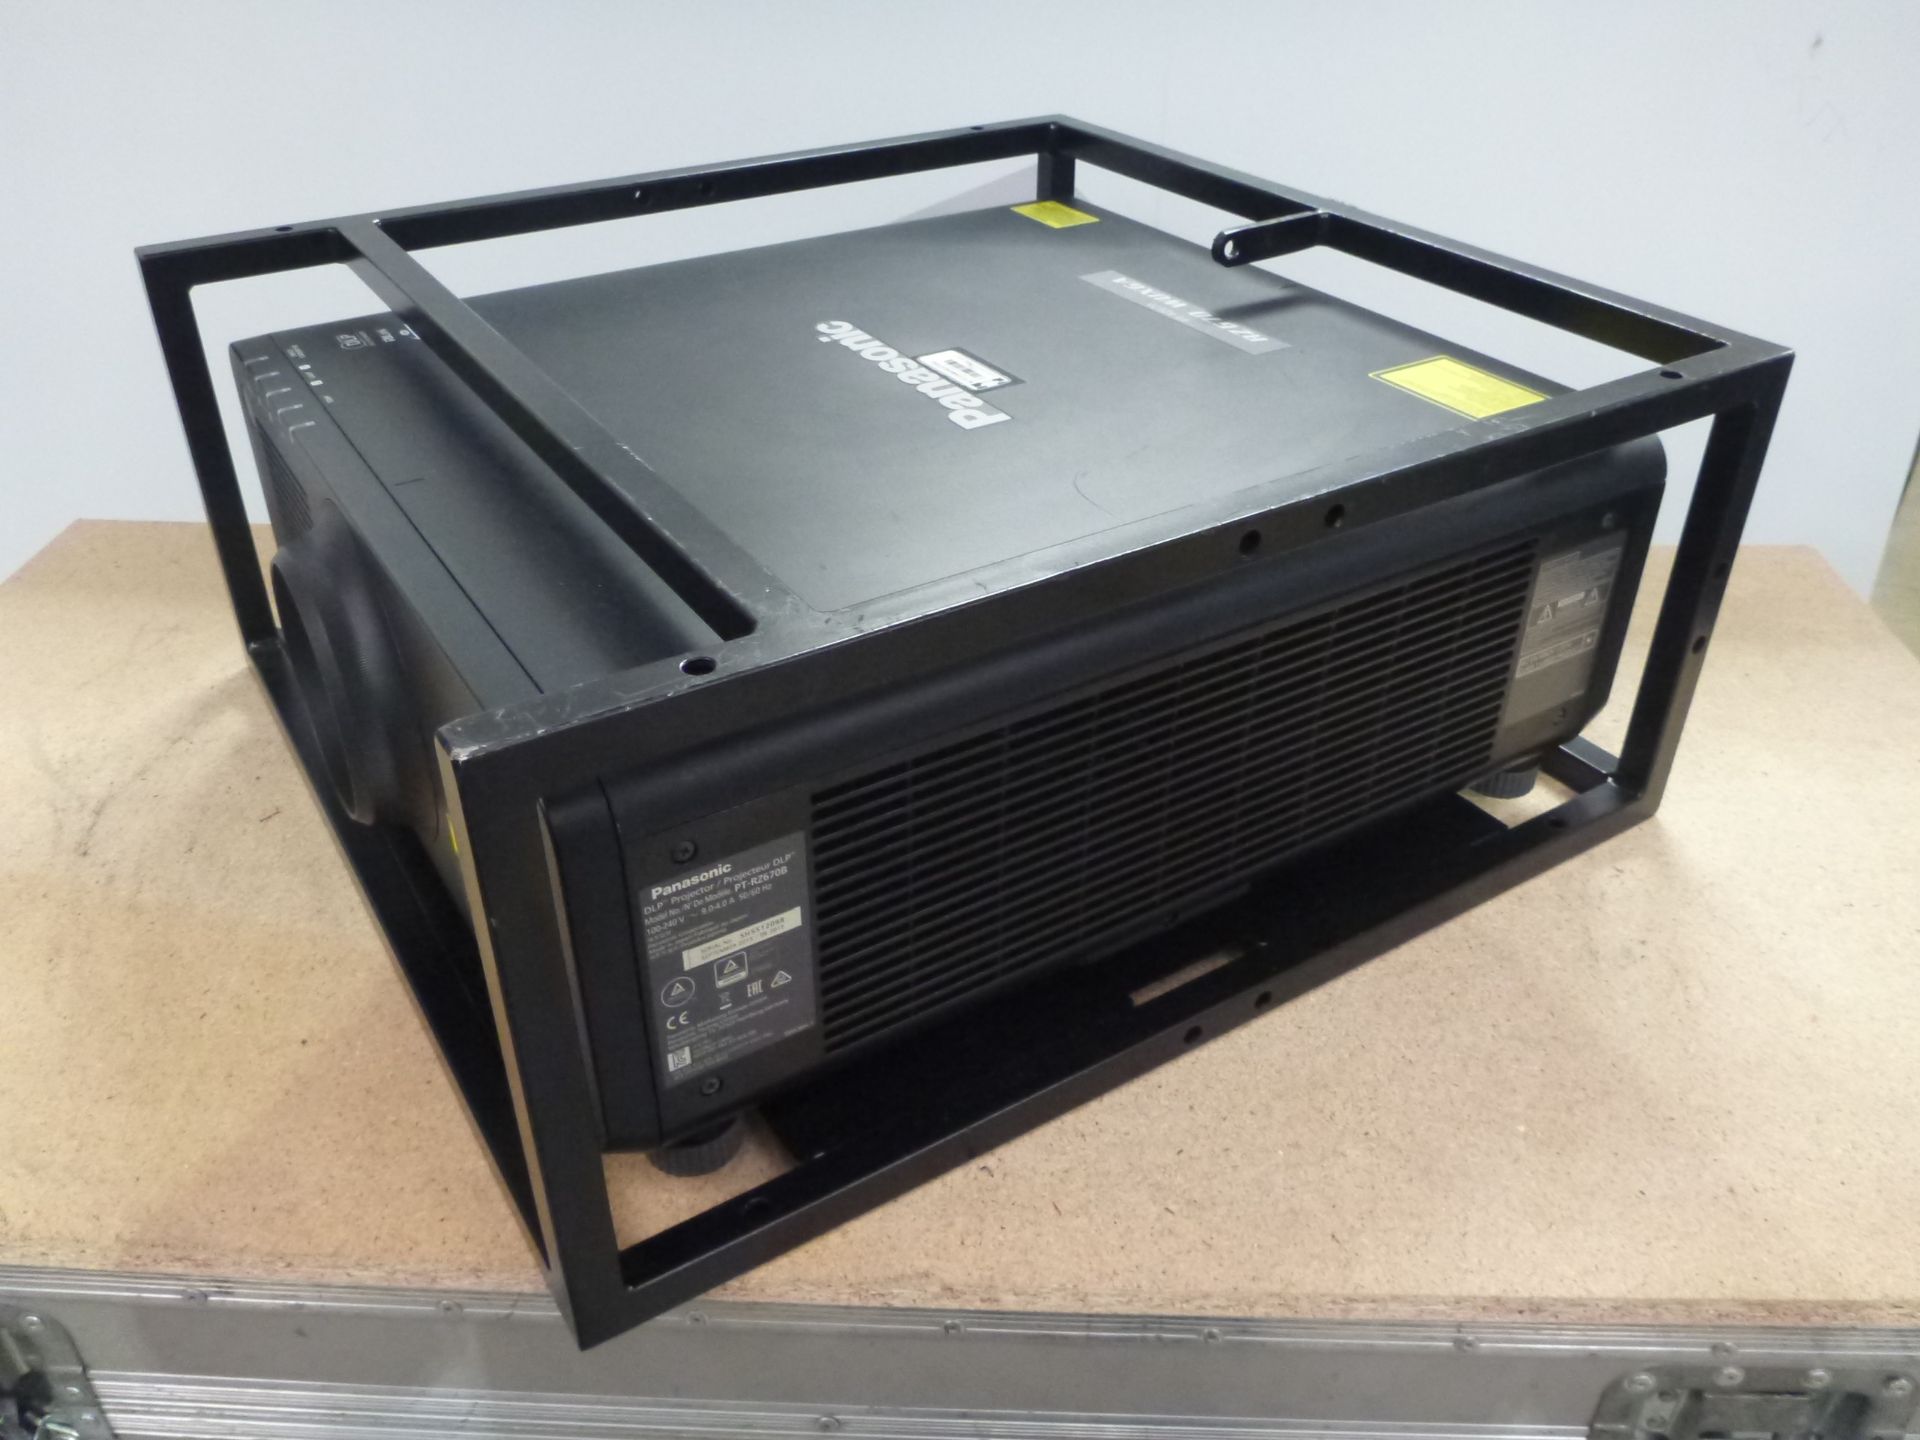 Panasonic Laser Projector, Model PT-RZ670, S/N SH5512098, YOM 2015, In flight case with standard 1. - Image 2 of 11